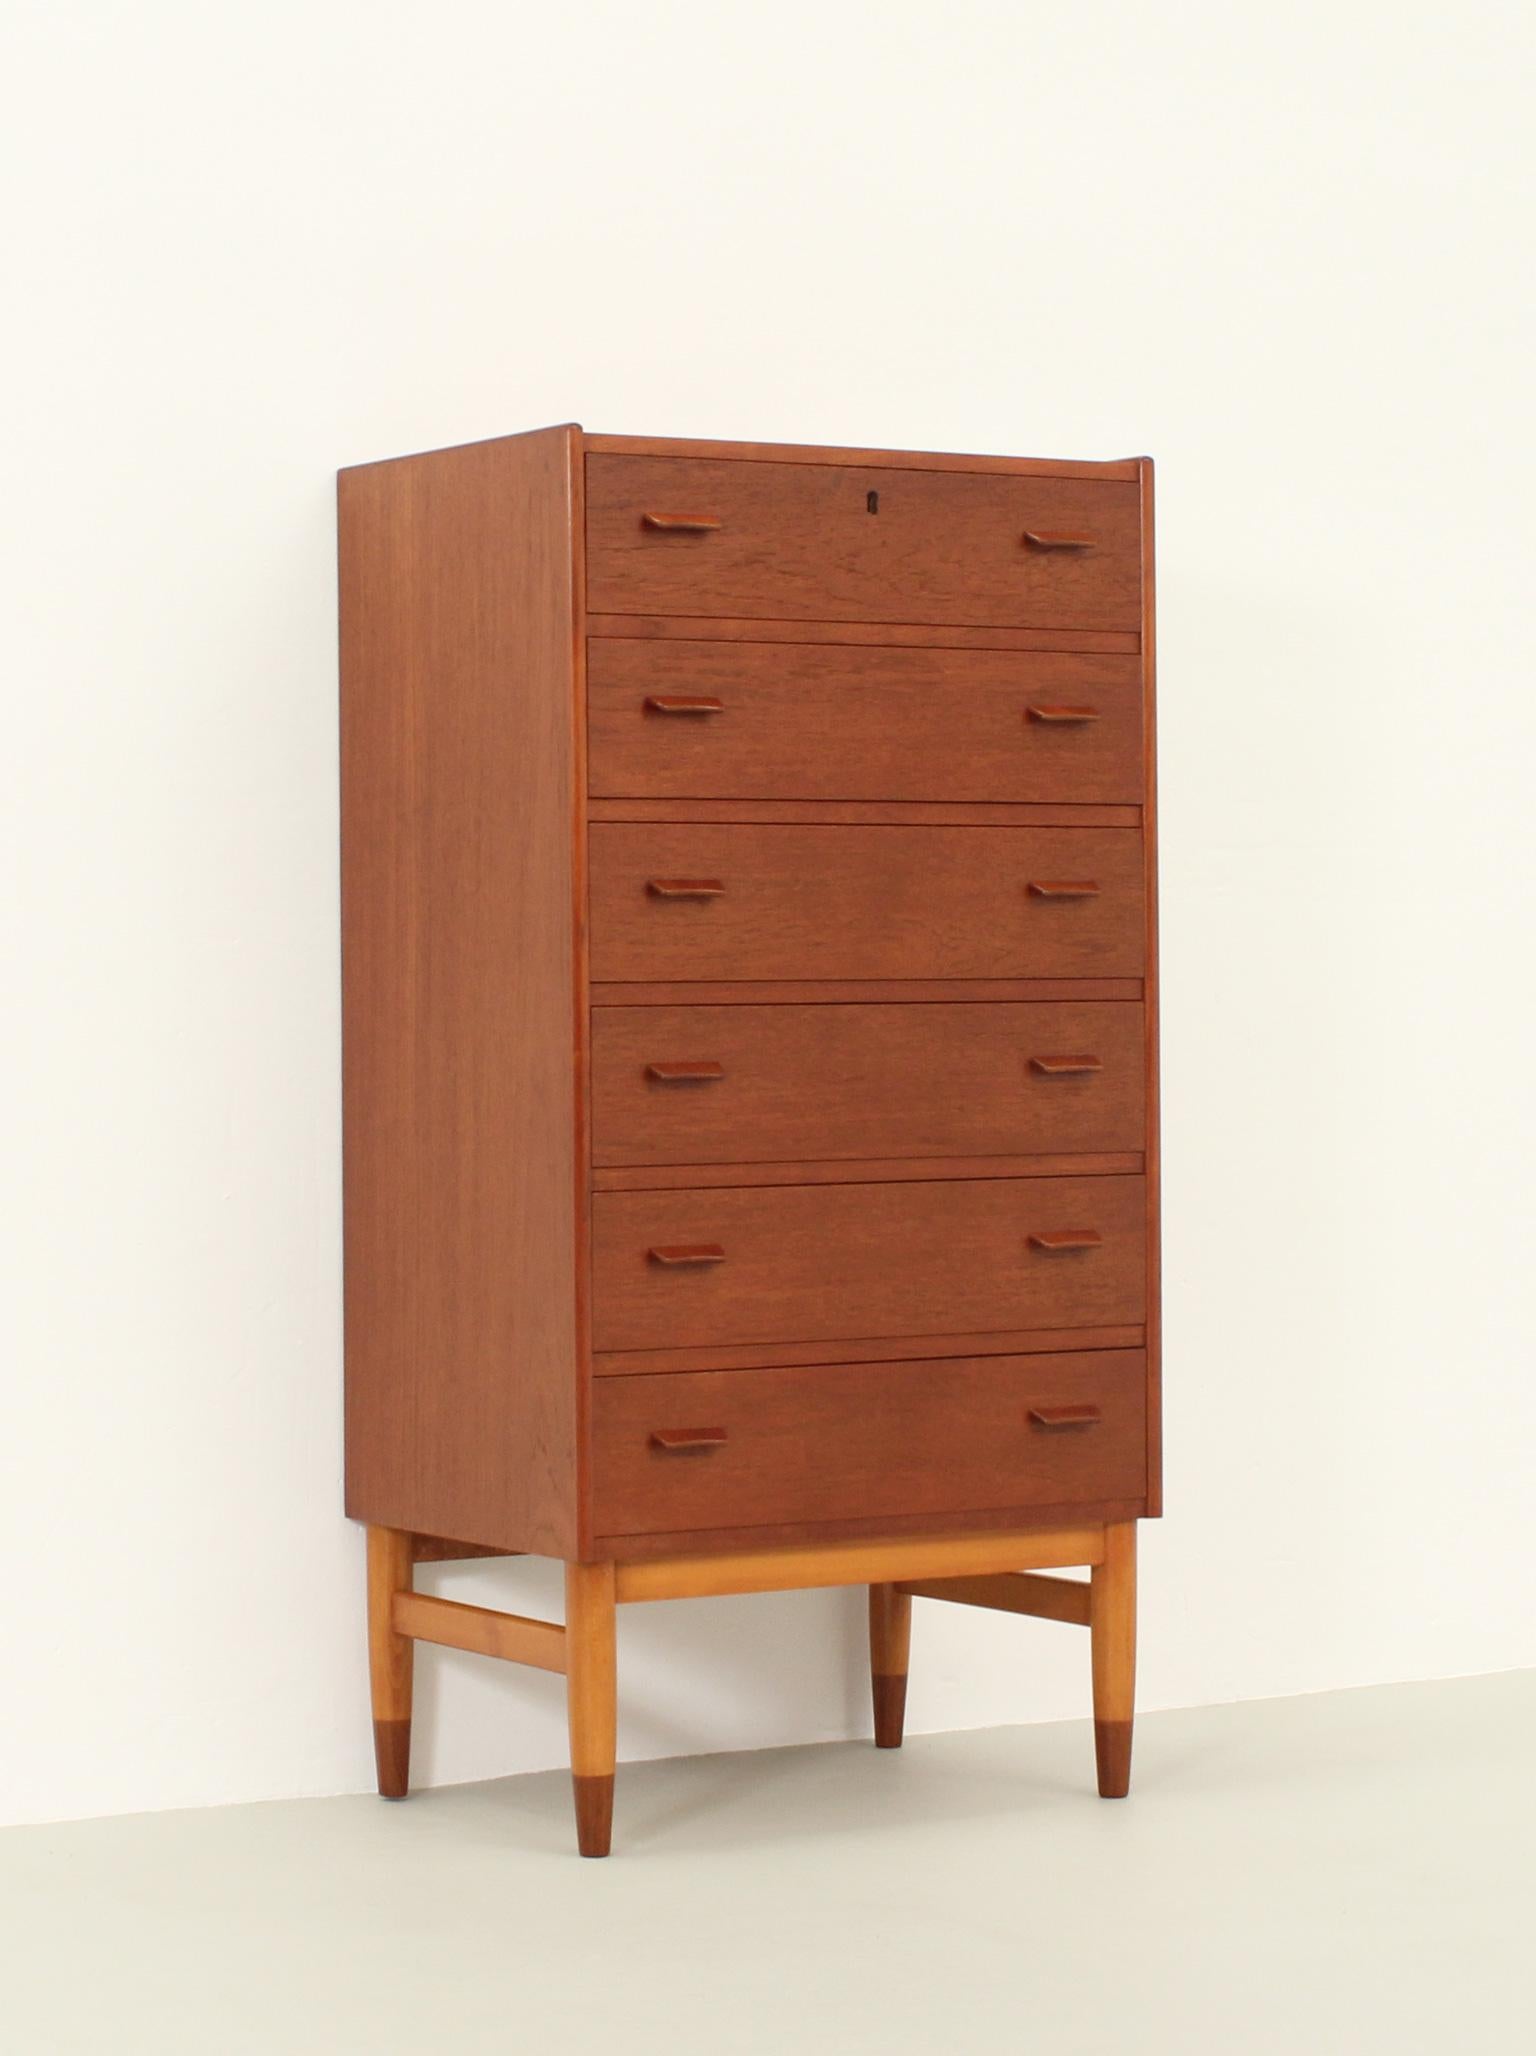 Chest of drawers designed in 1957 by Carl Aage Skov for Munch Møbler, Denmark. Slim model with six drawers in teak wood and bicolor base in oak and teak wood ends.